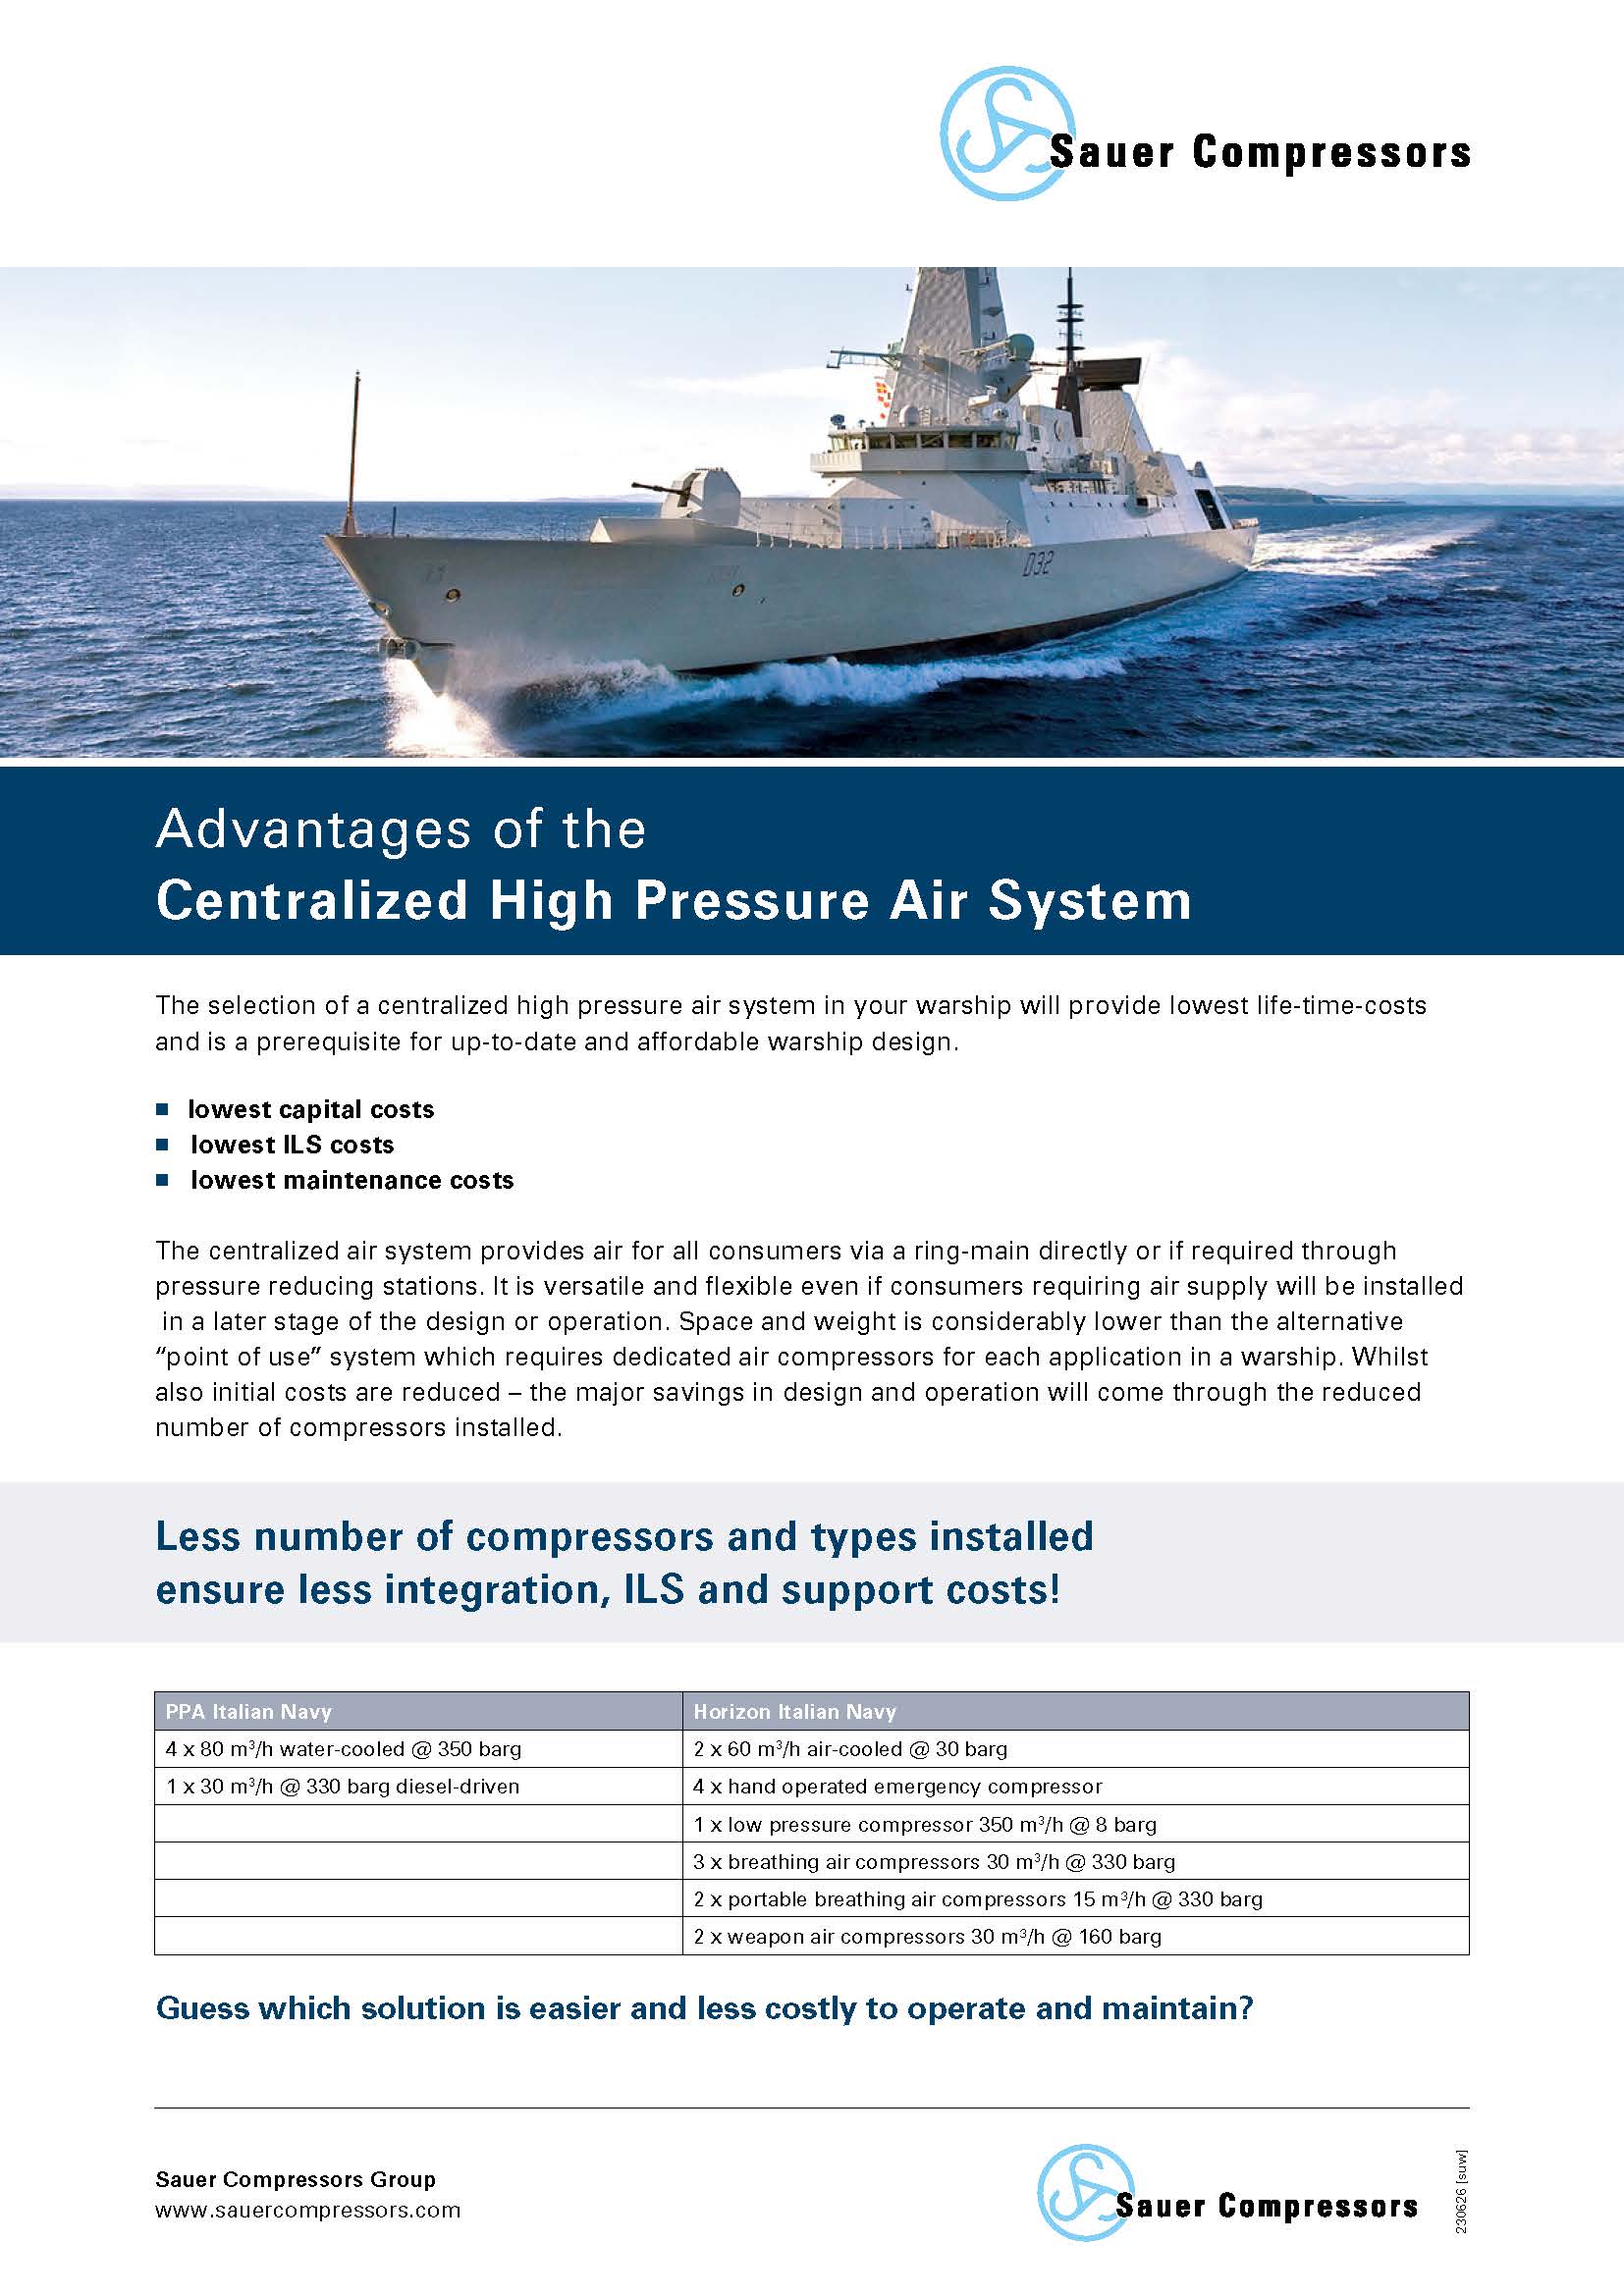 Centralized High Pressure Air System